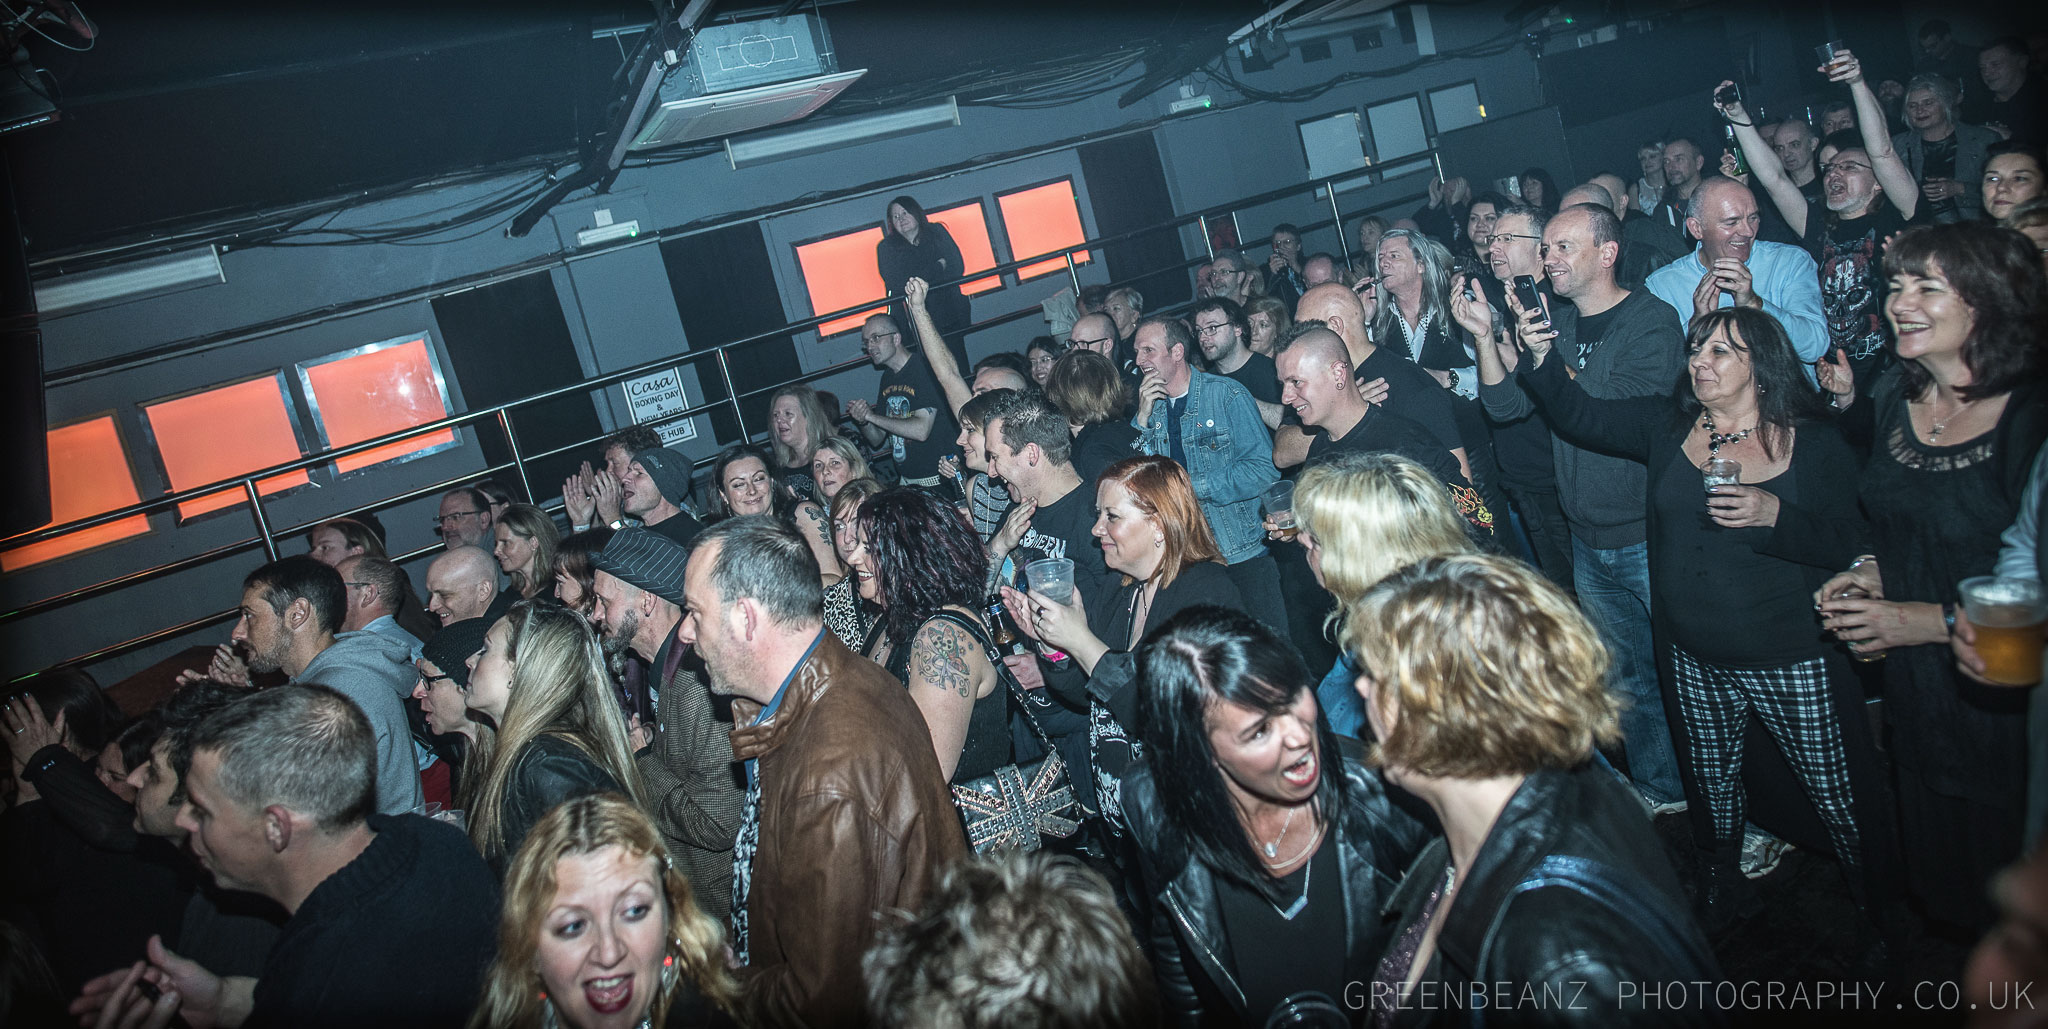 The Hub / dBs Live full of rock fans enjoying the Plymouth live music scene